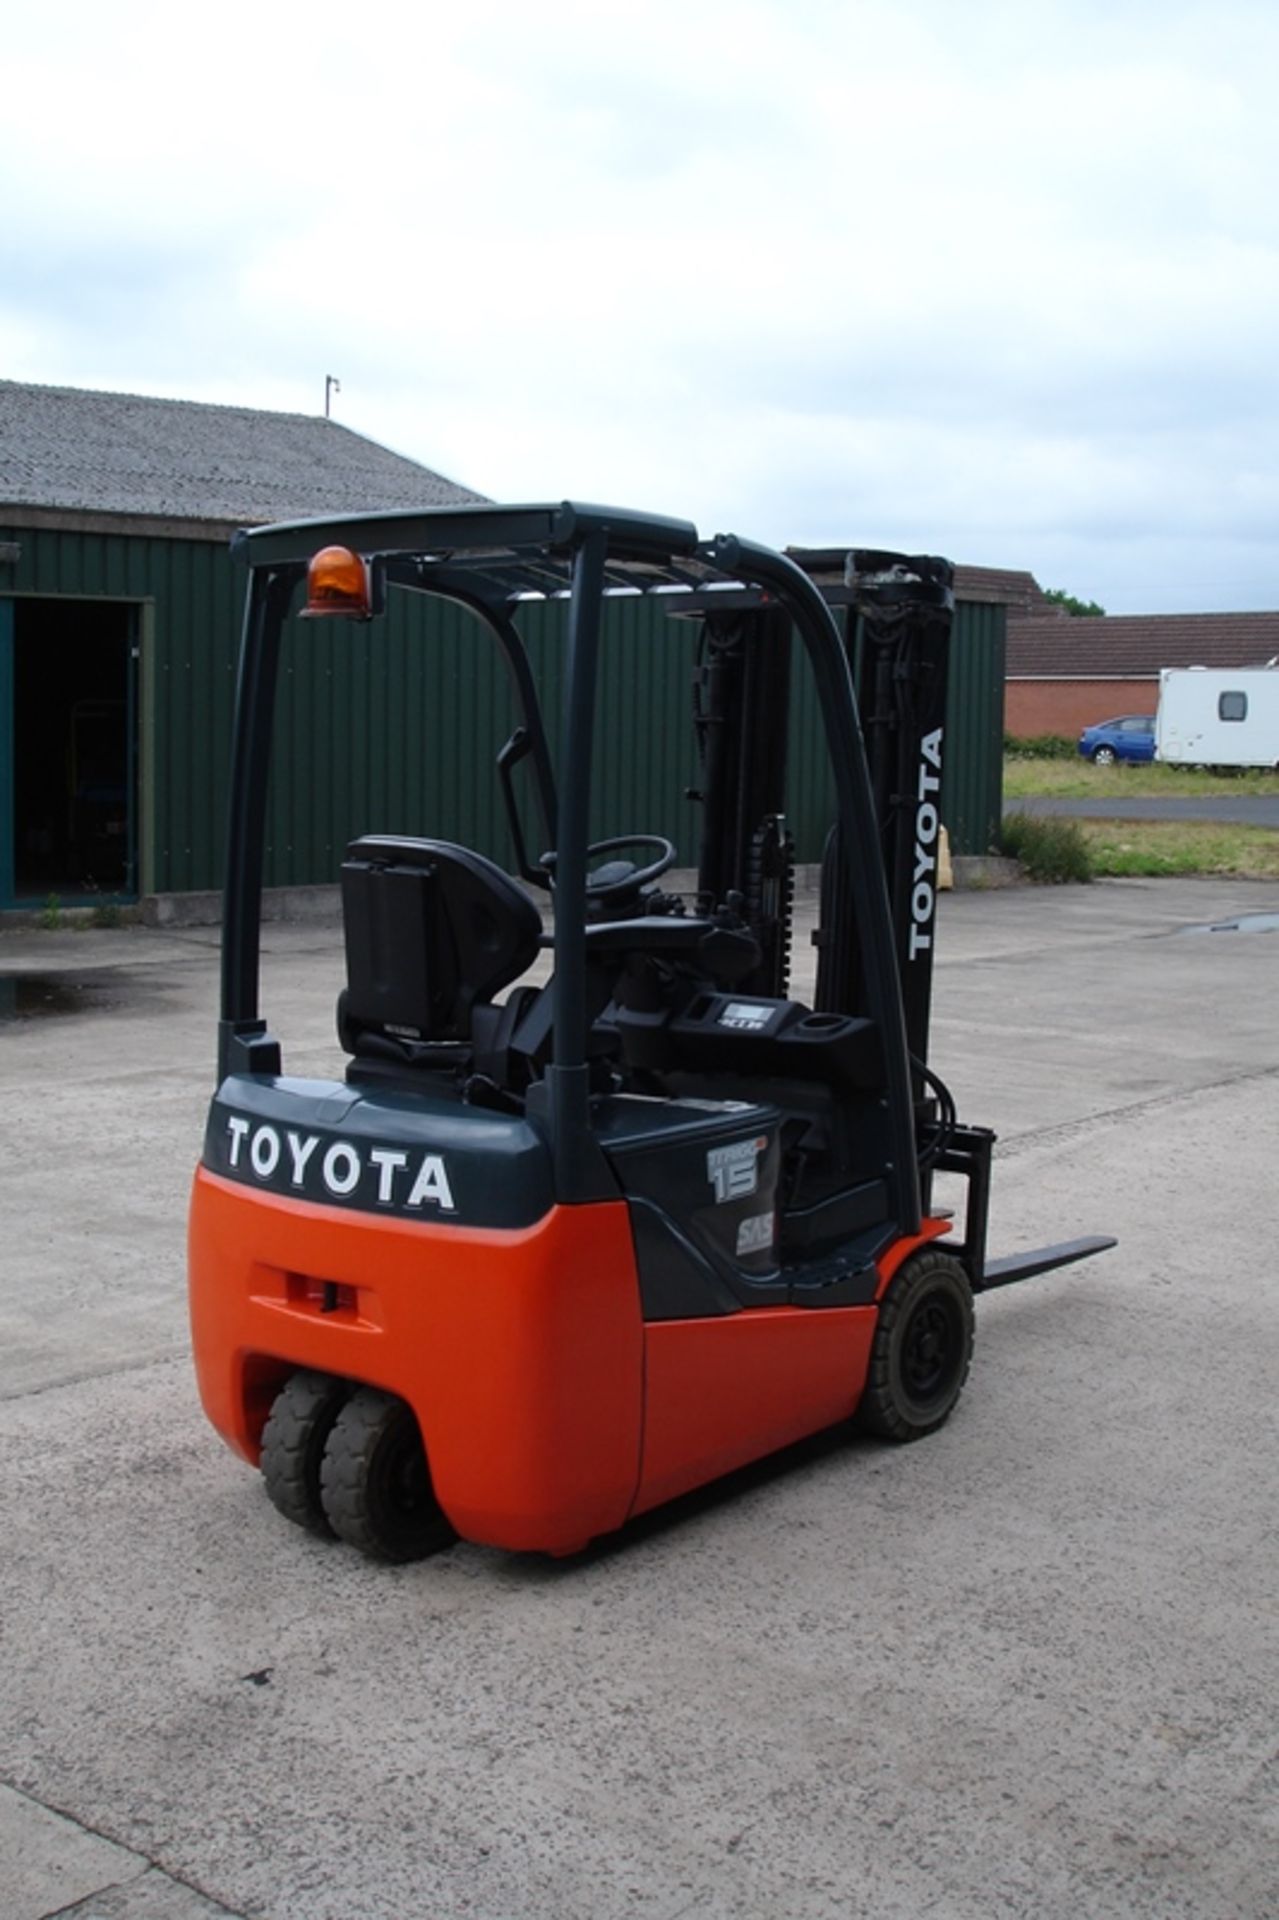 TOYOTA 1.5 TON ELECTRIC FORKLIFT - Image 3 of 6